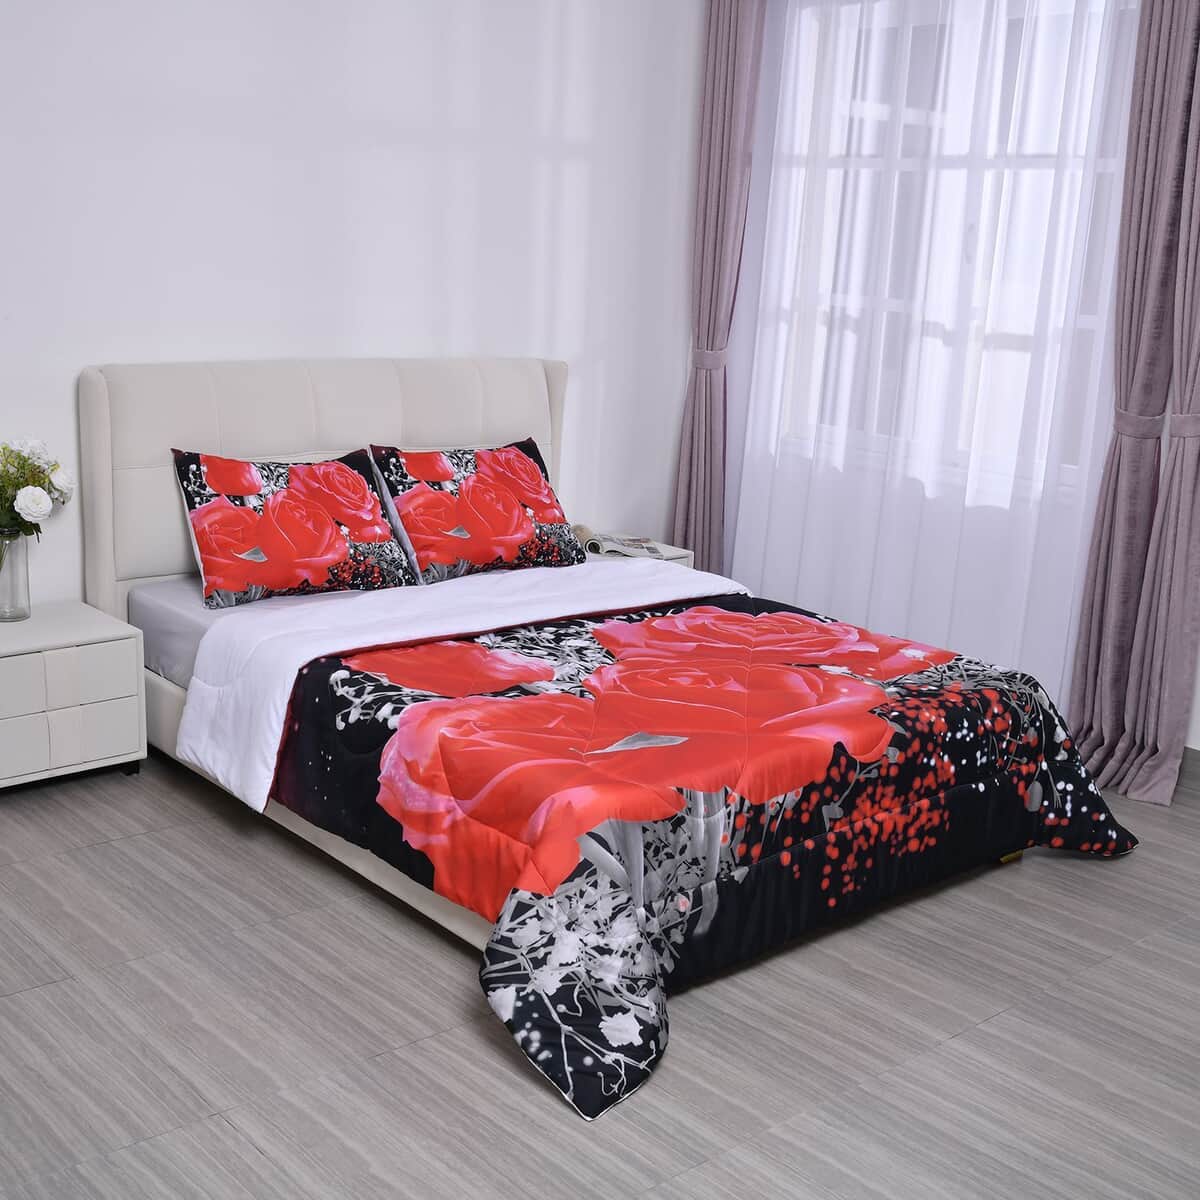 Homesmart Red Floral 3D Digital Print Pattern Microfiber Comforter and Pillow Cover - Queen, Best Comforter Sets, Bed Comforters, Comforter Set for Bedroom image number 0